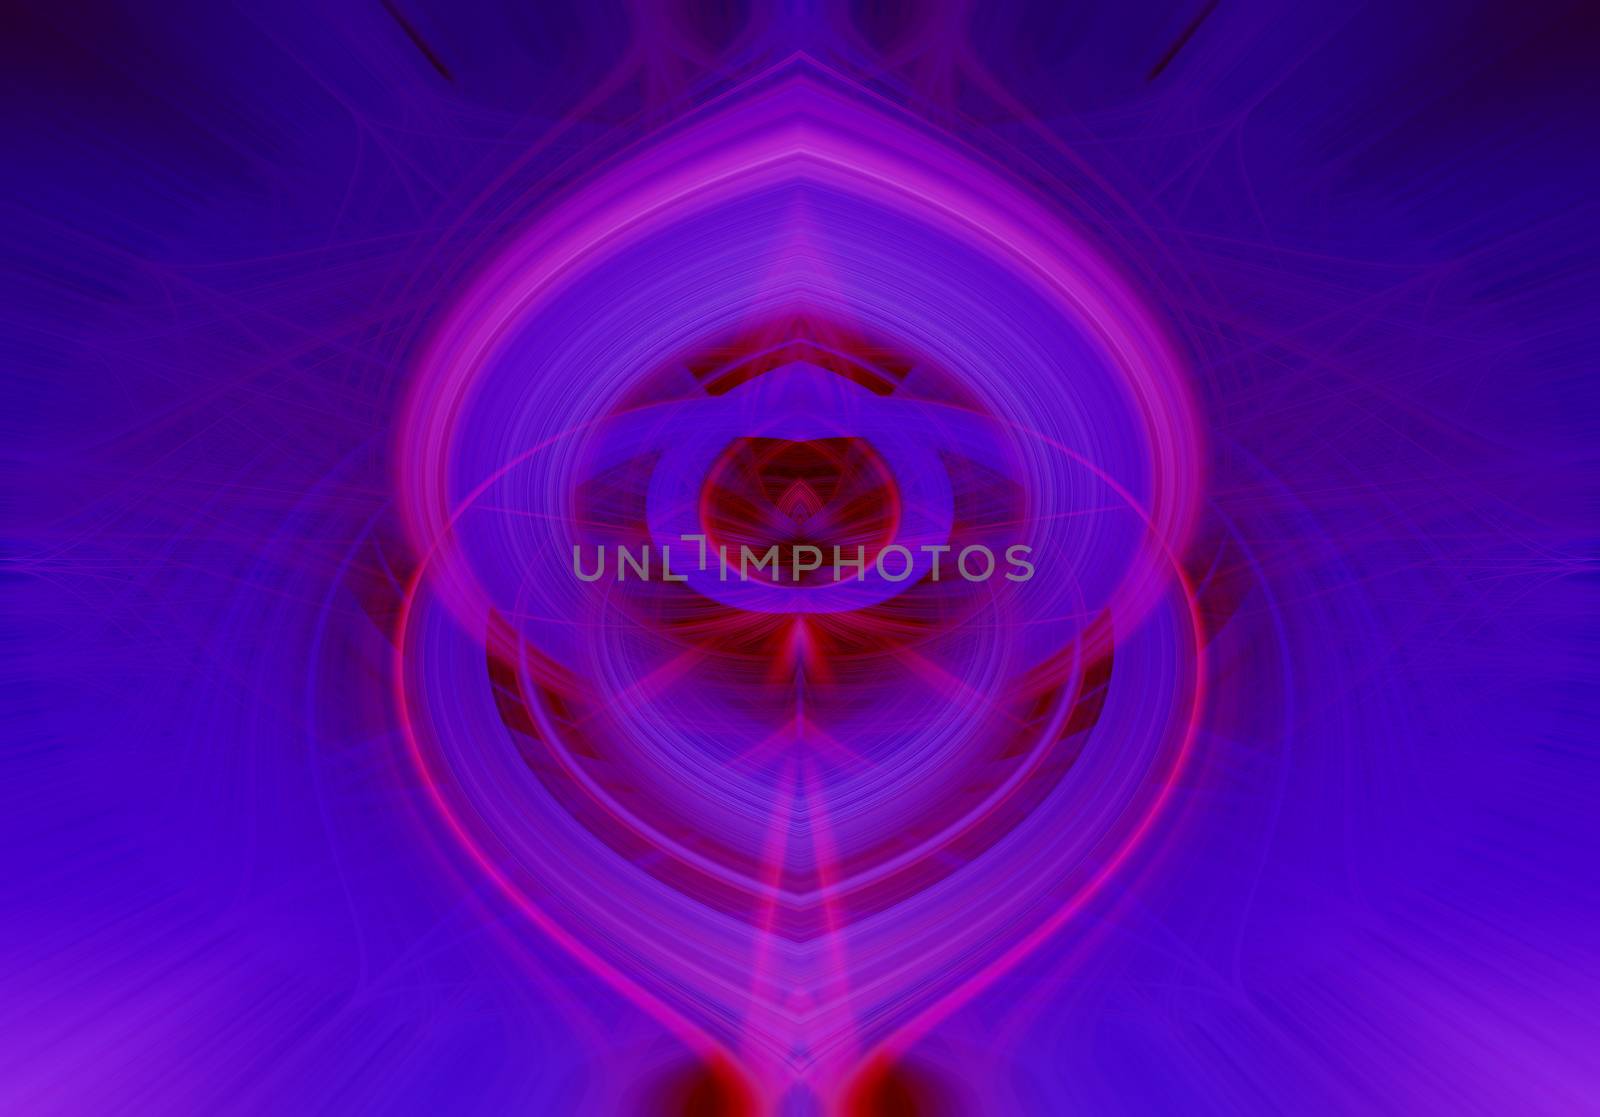 Beautiful abstract intertwined 3d fibers forming a shape of sparkle, flame, flower, interlinked hearts. Blue, maroon, pink, and purple colors. Illustration.